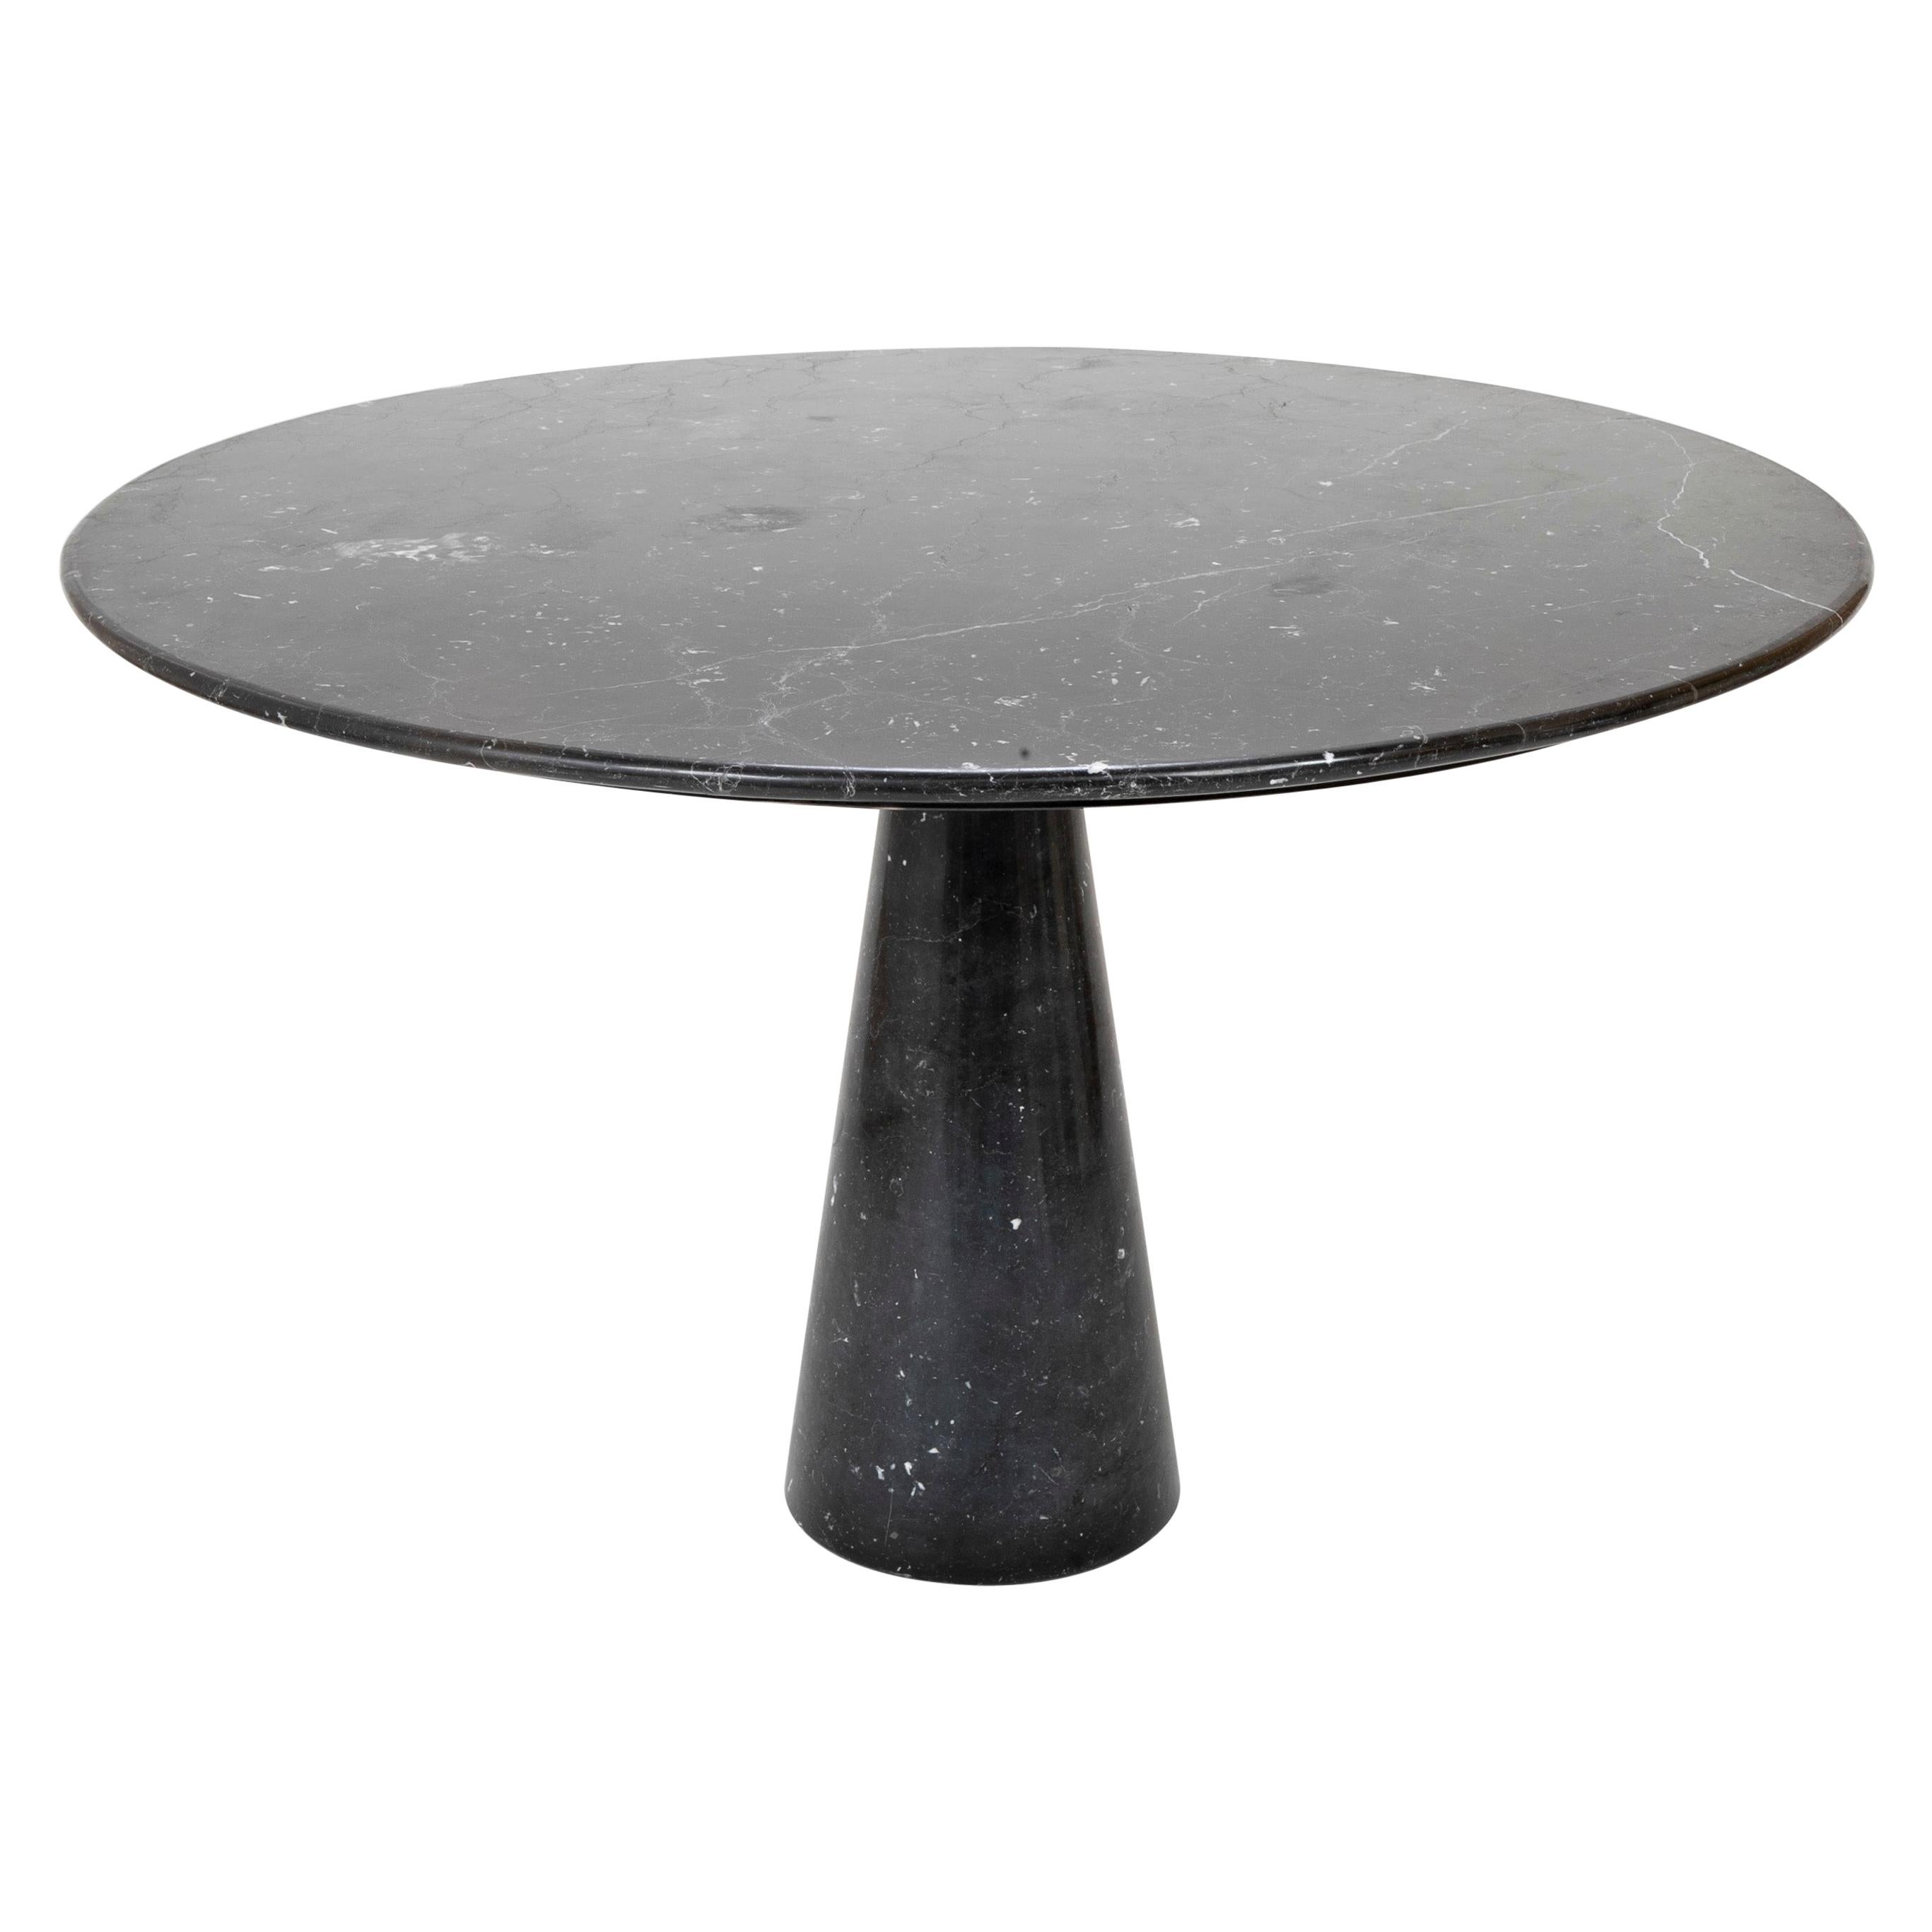 "Eros" Round Pedestal Table by Angelo Mangiarotti in Black Marble